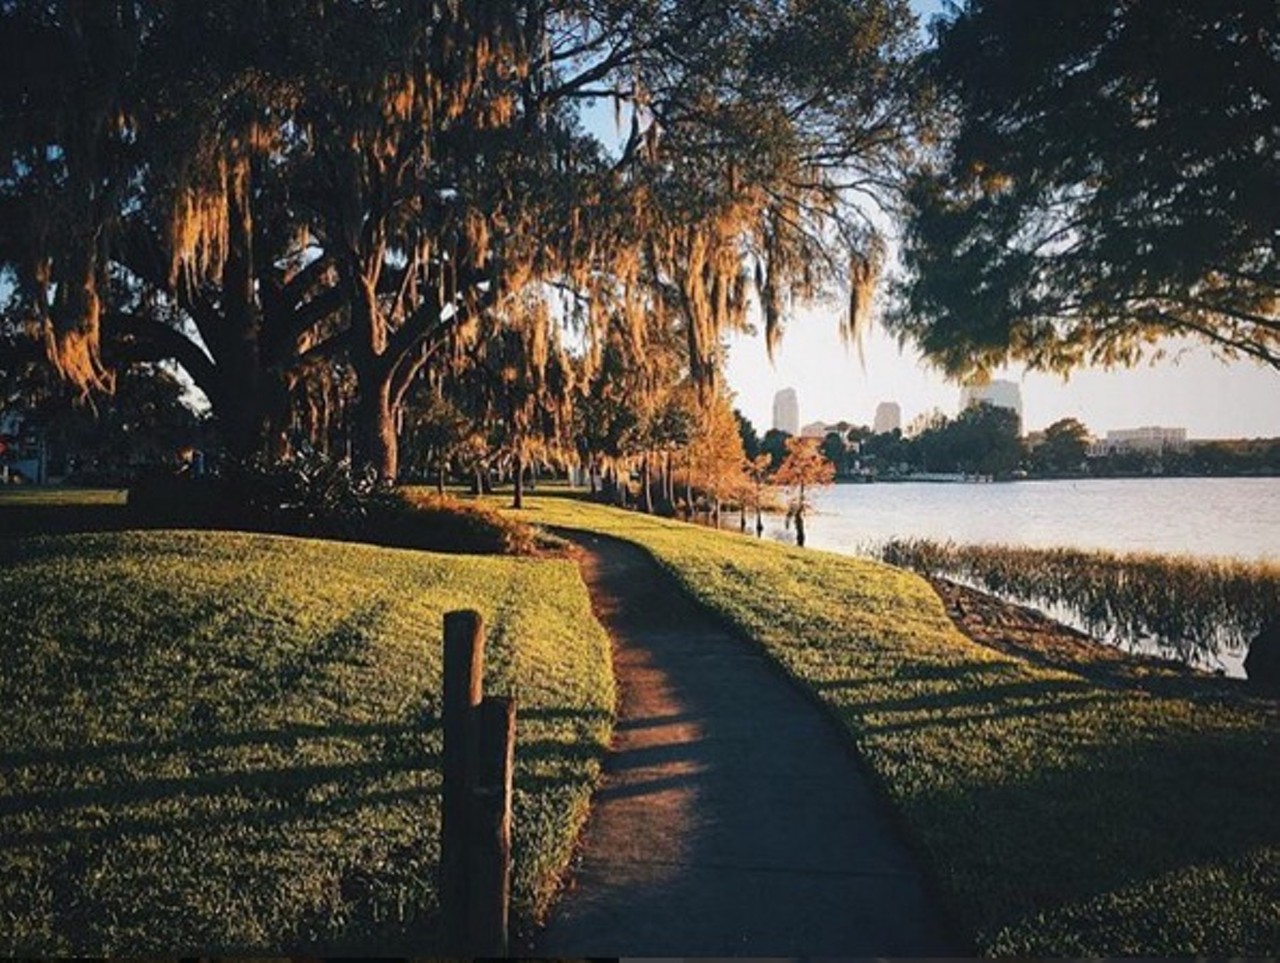 @igers_orlando | Instagramers of Orlando is the official Orlando Instagram community.